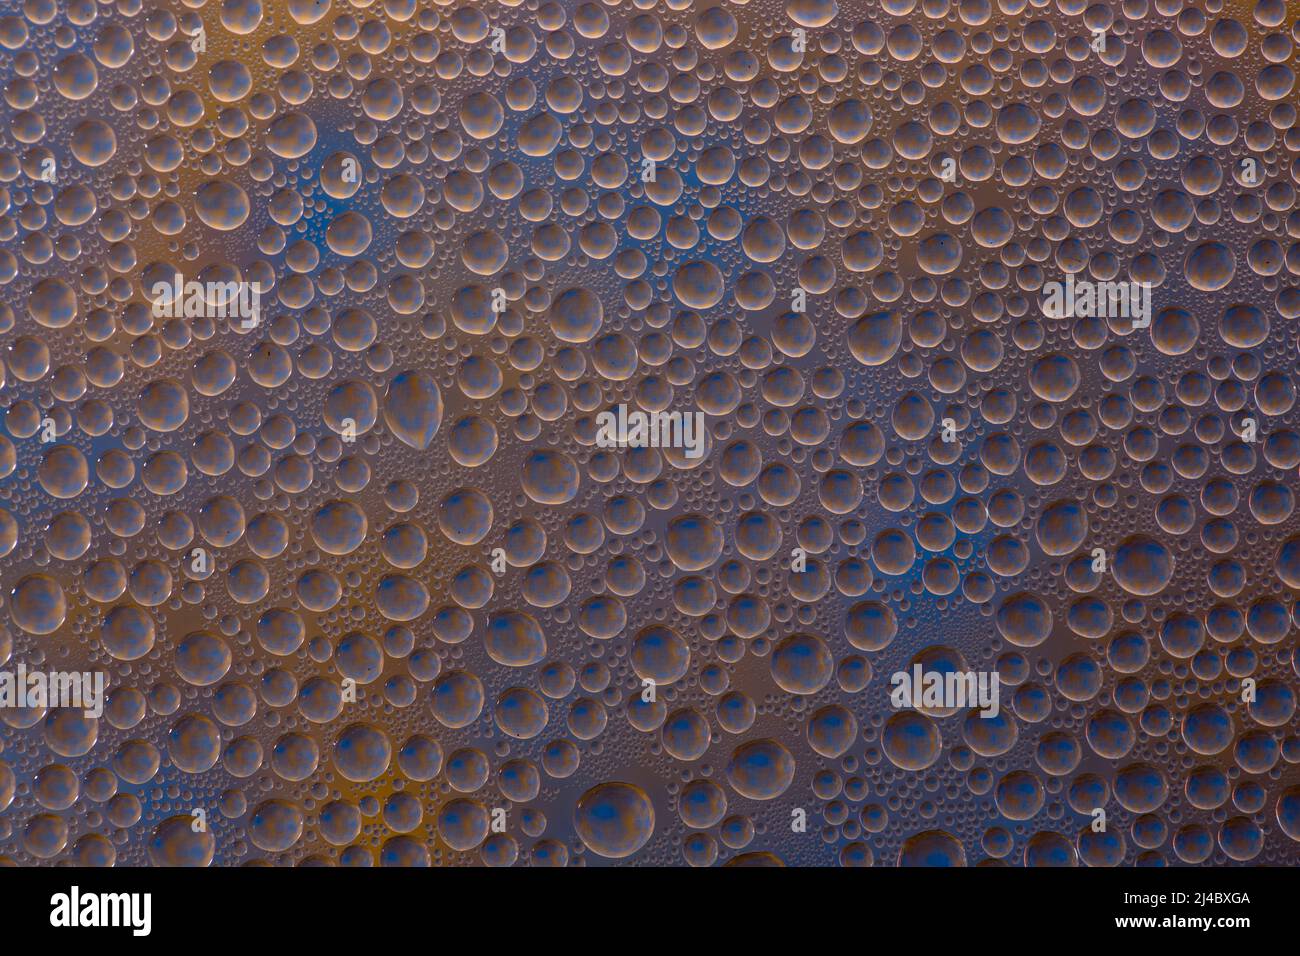 Abstract background of water droplets on the glass surface Stock Photo